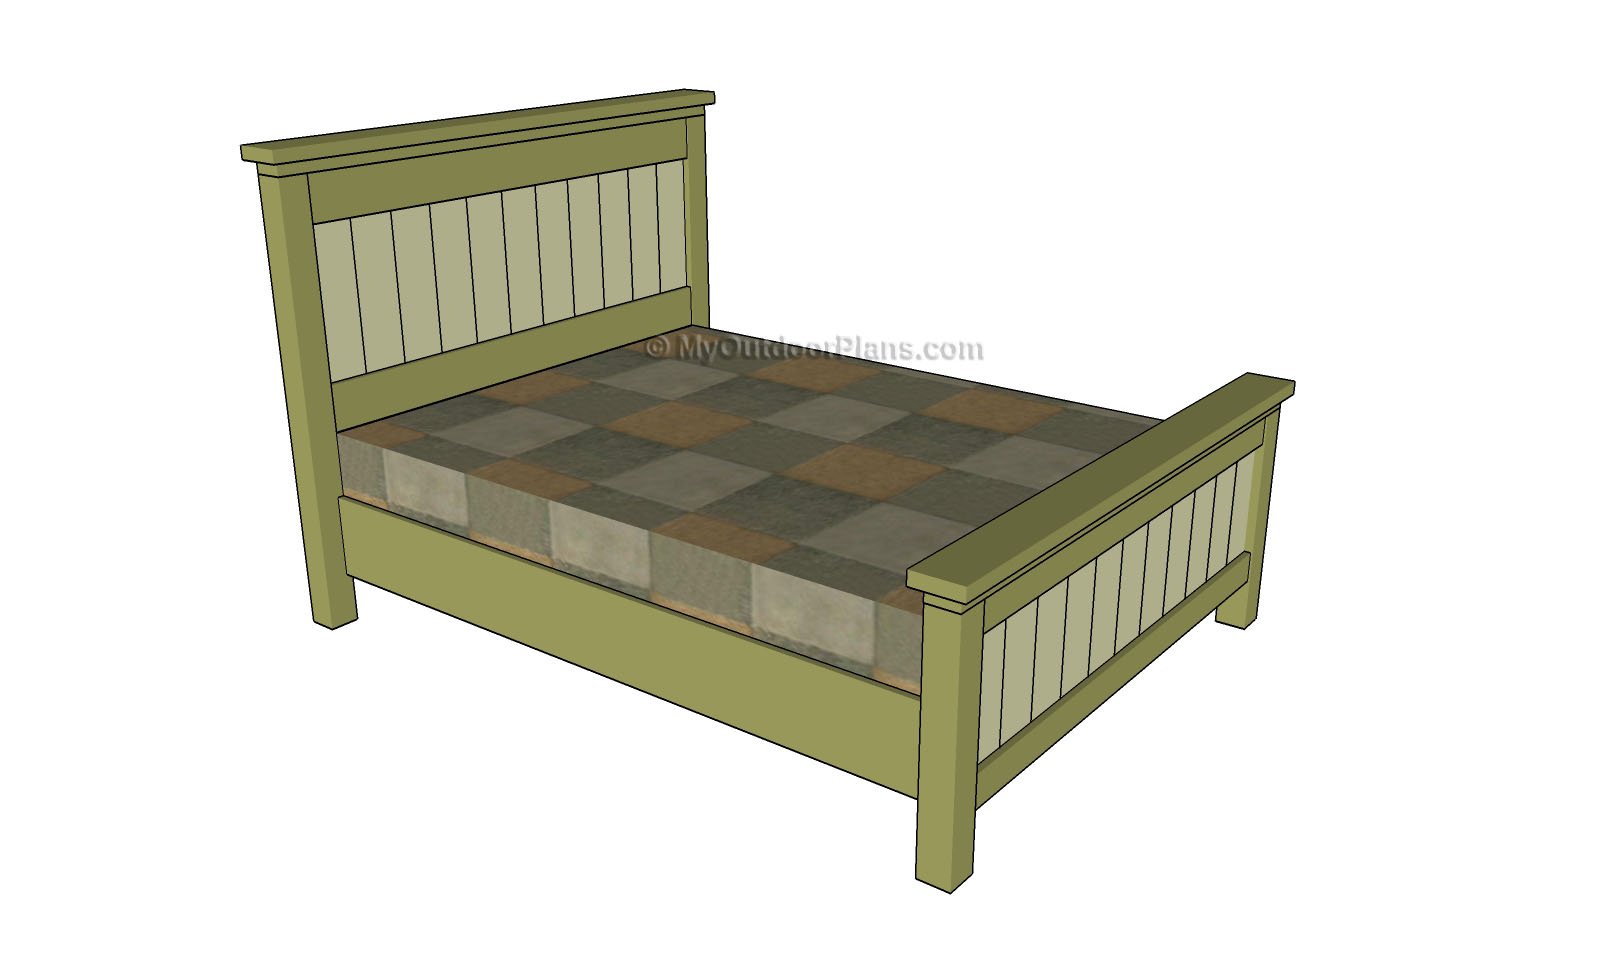 Queen Size Bed Plans | Free Outdoor Plans - DIY Shed, Wooden Playhouse ...